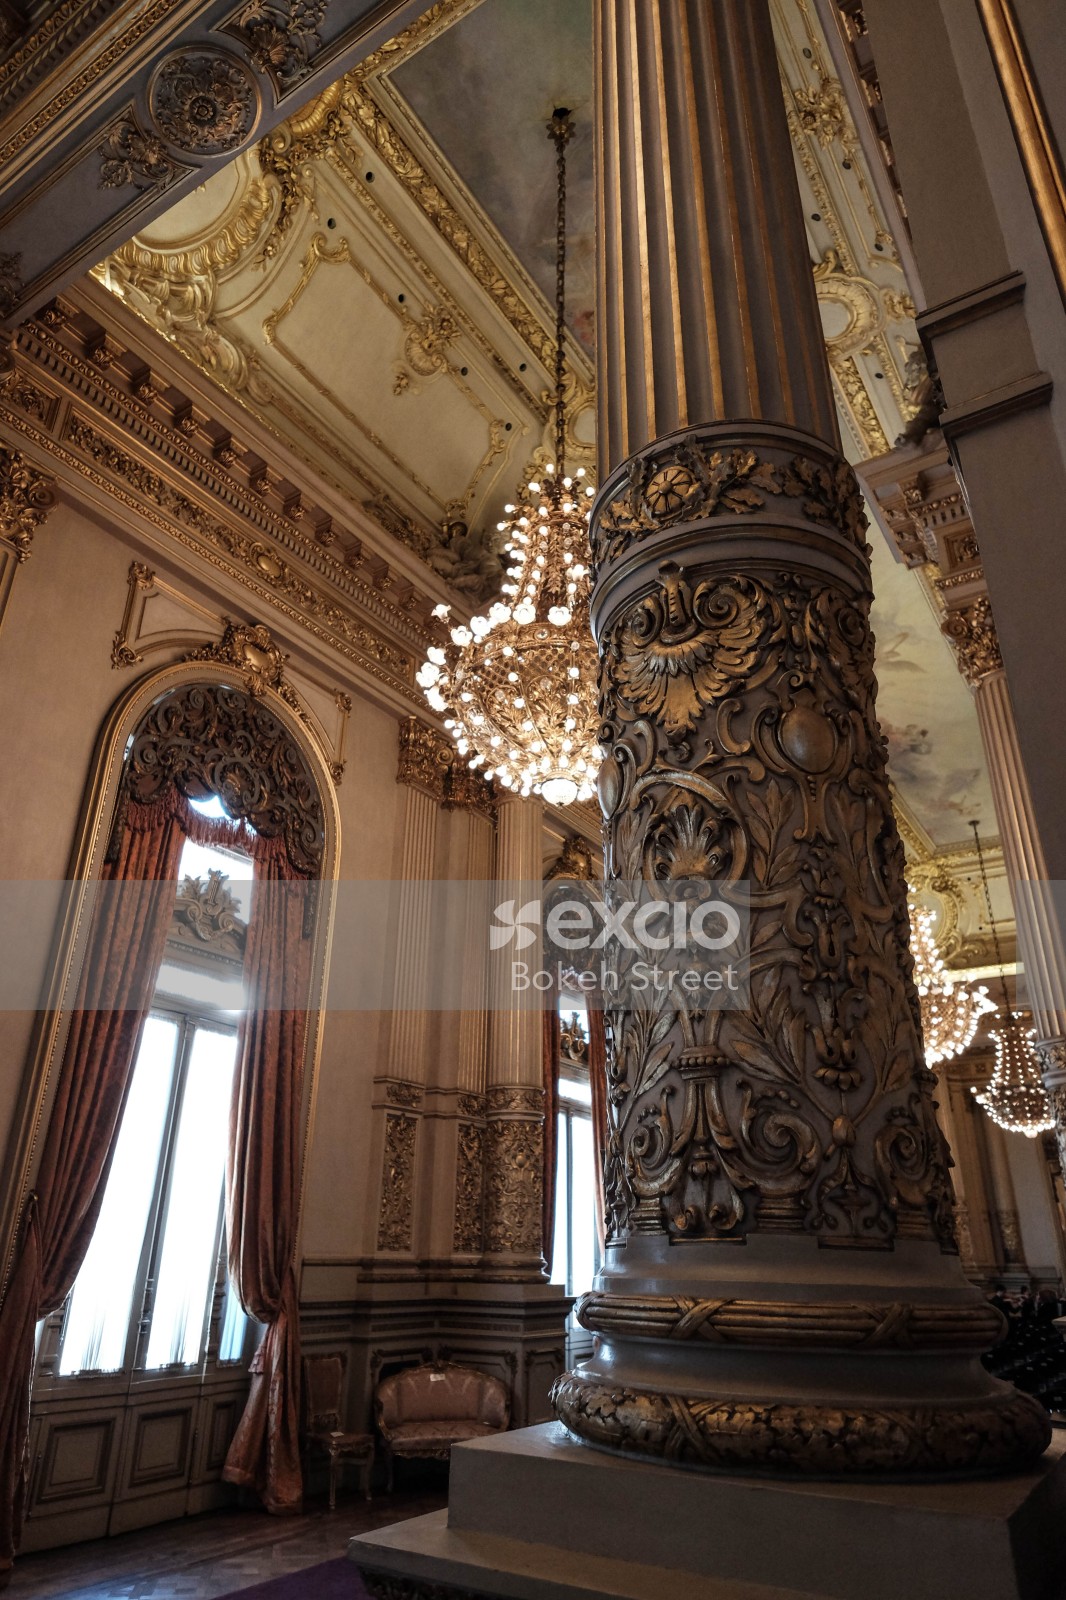 Beautiful interior design of a building with chandeliers and pillars